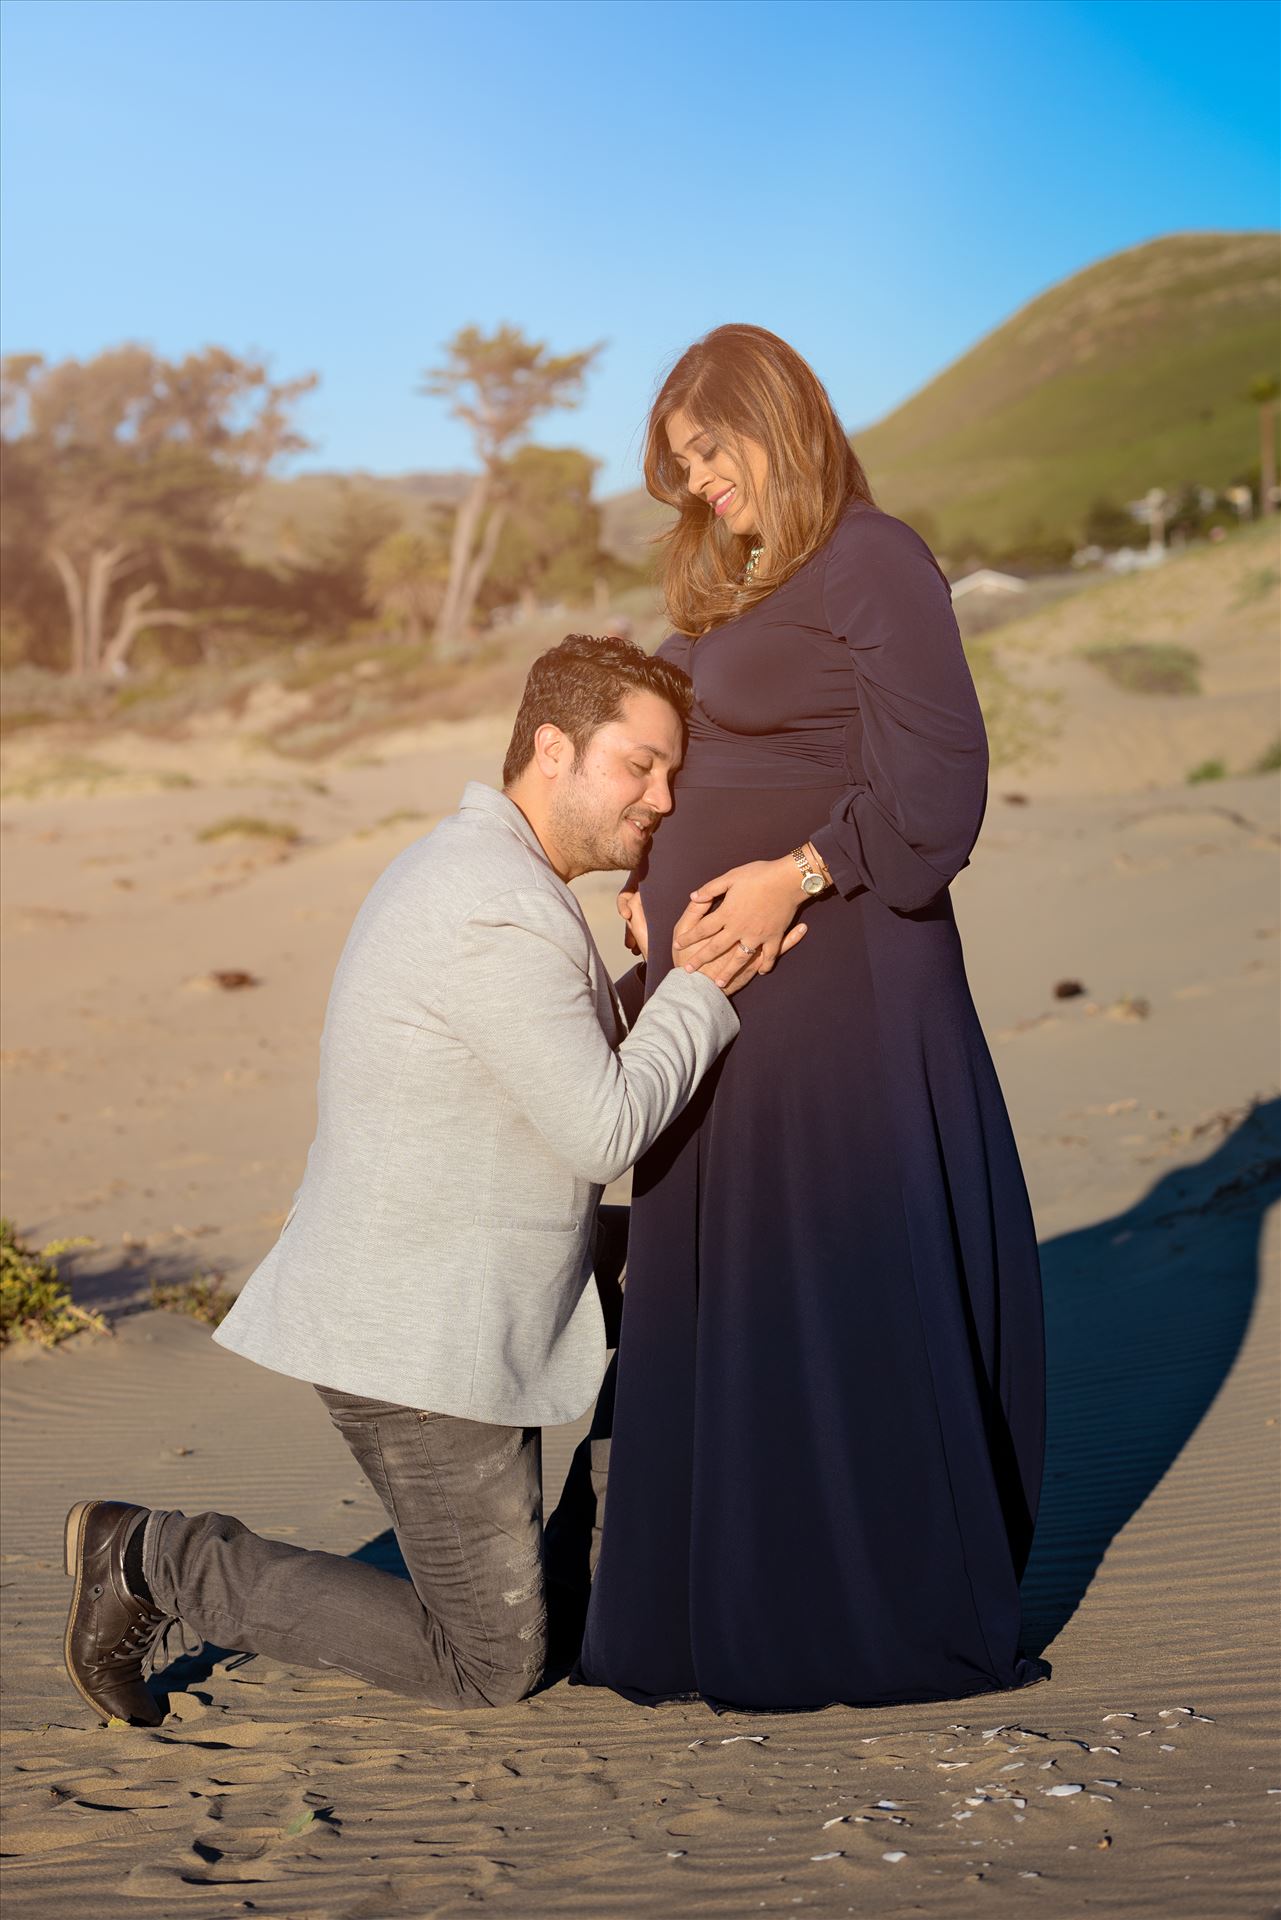 Siddiki Maternity Session 22  by Sarah Williams